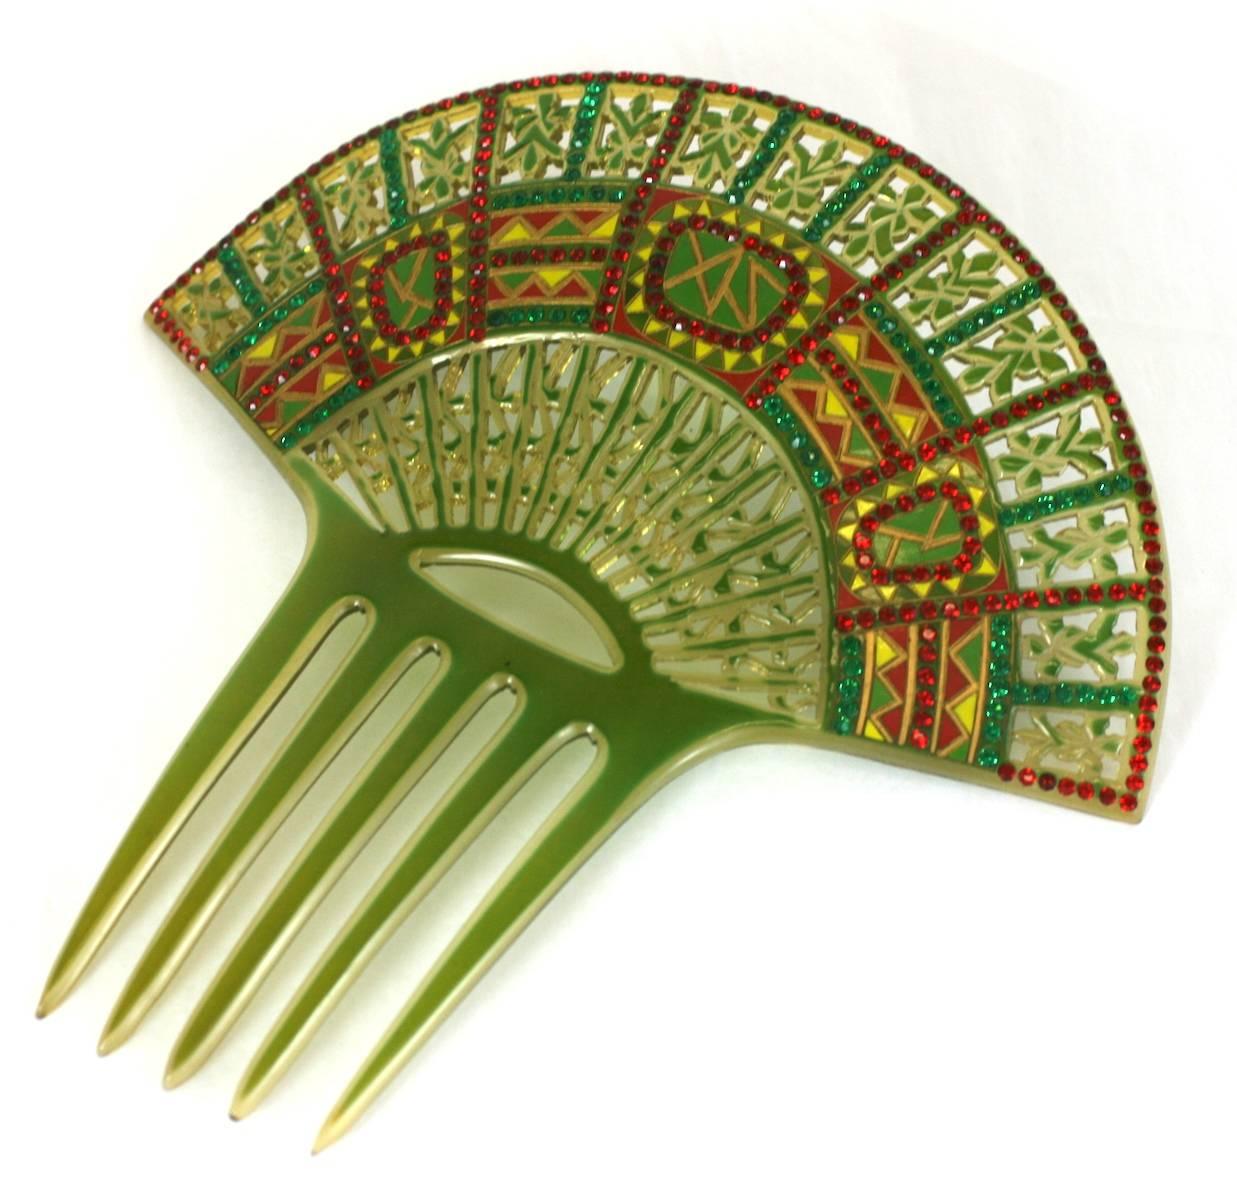 Wonderful Art Deco Eygptian Revival Comb of clear celluloid overlaid with green. The design is then pierced, overpainted and set with pave stones in red and green. France 1930's. 
Excellent condition. 7